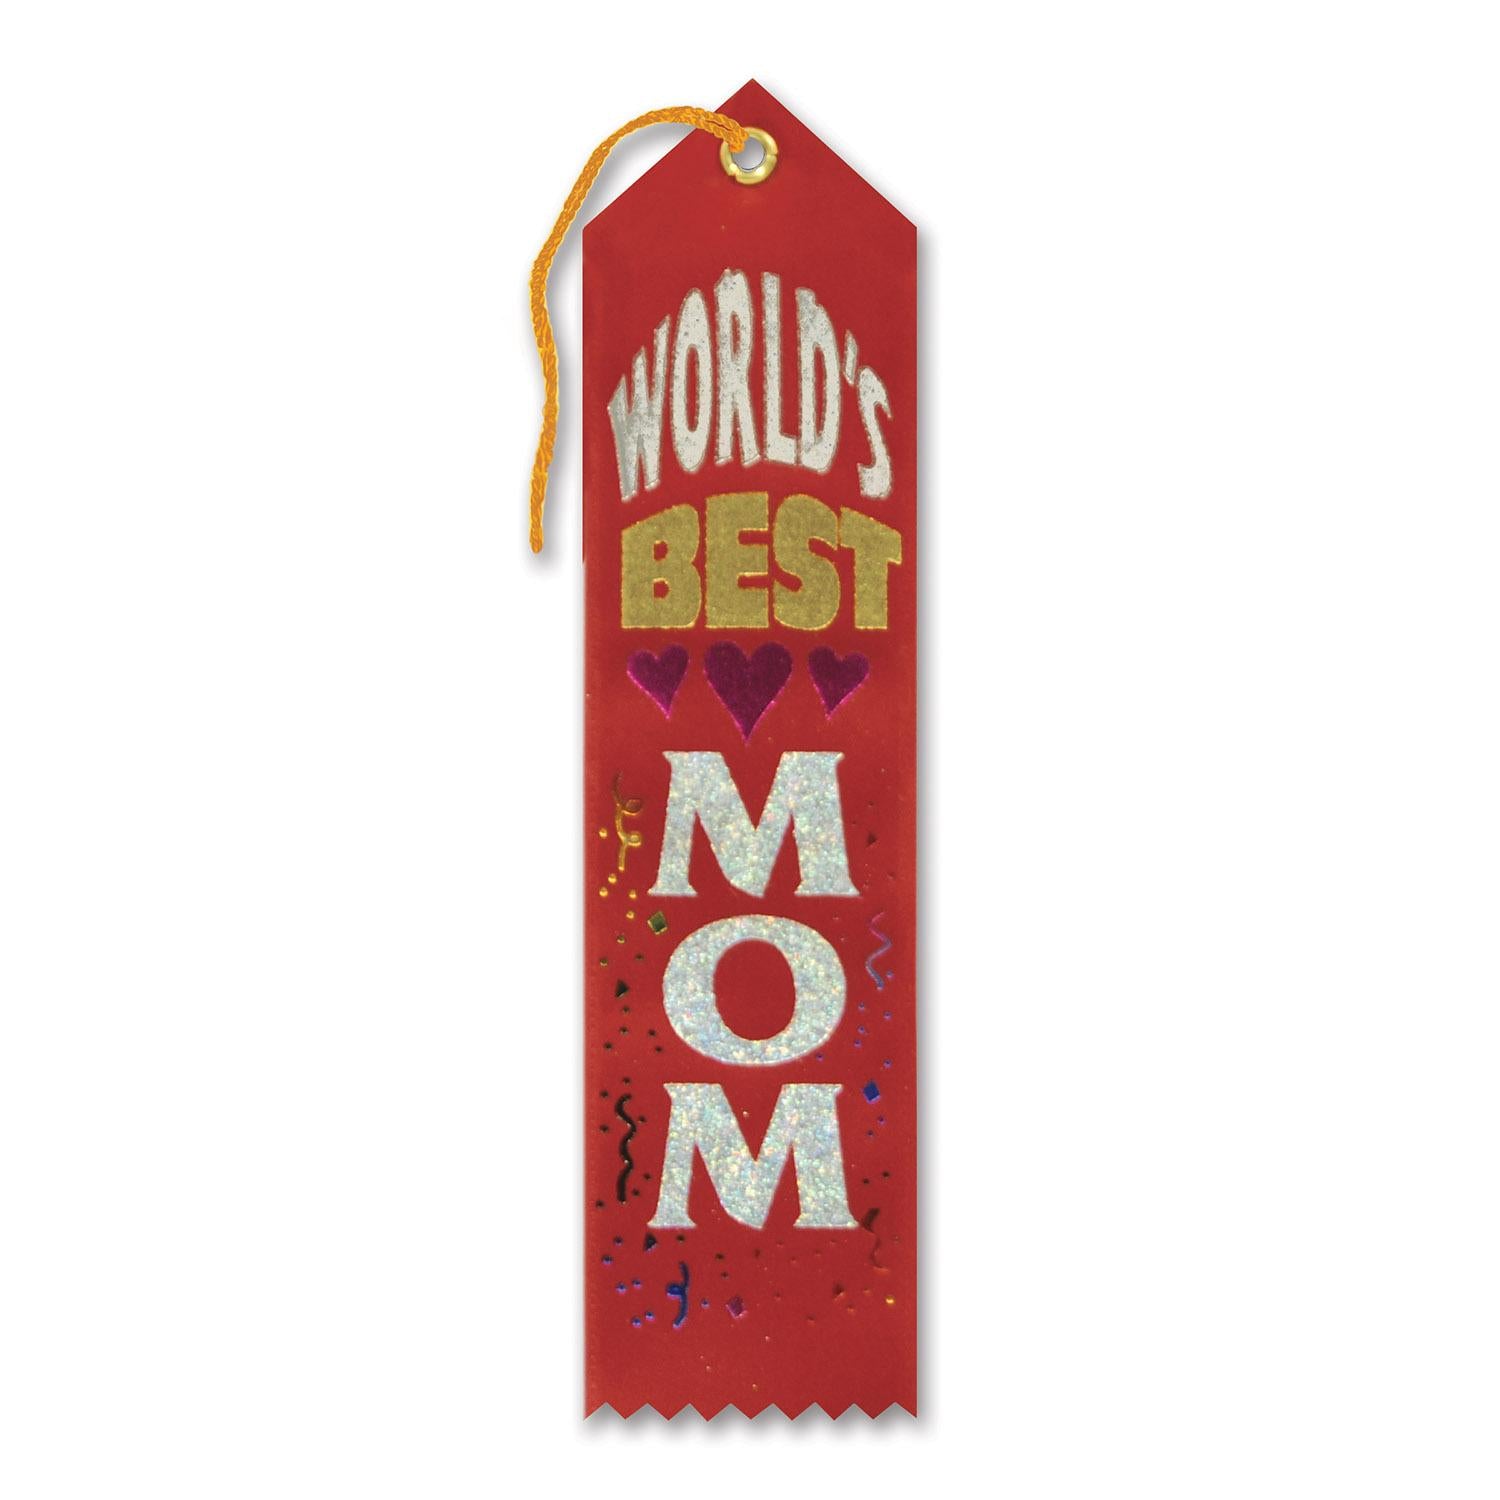 Beistle World's Best Mom Mother's Day Award Ribbon - red